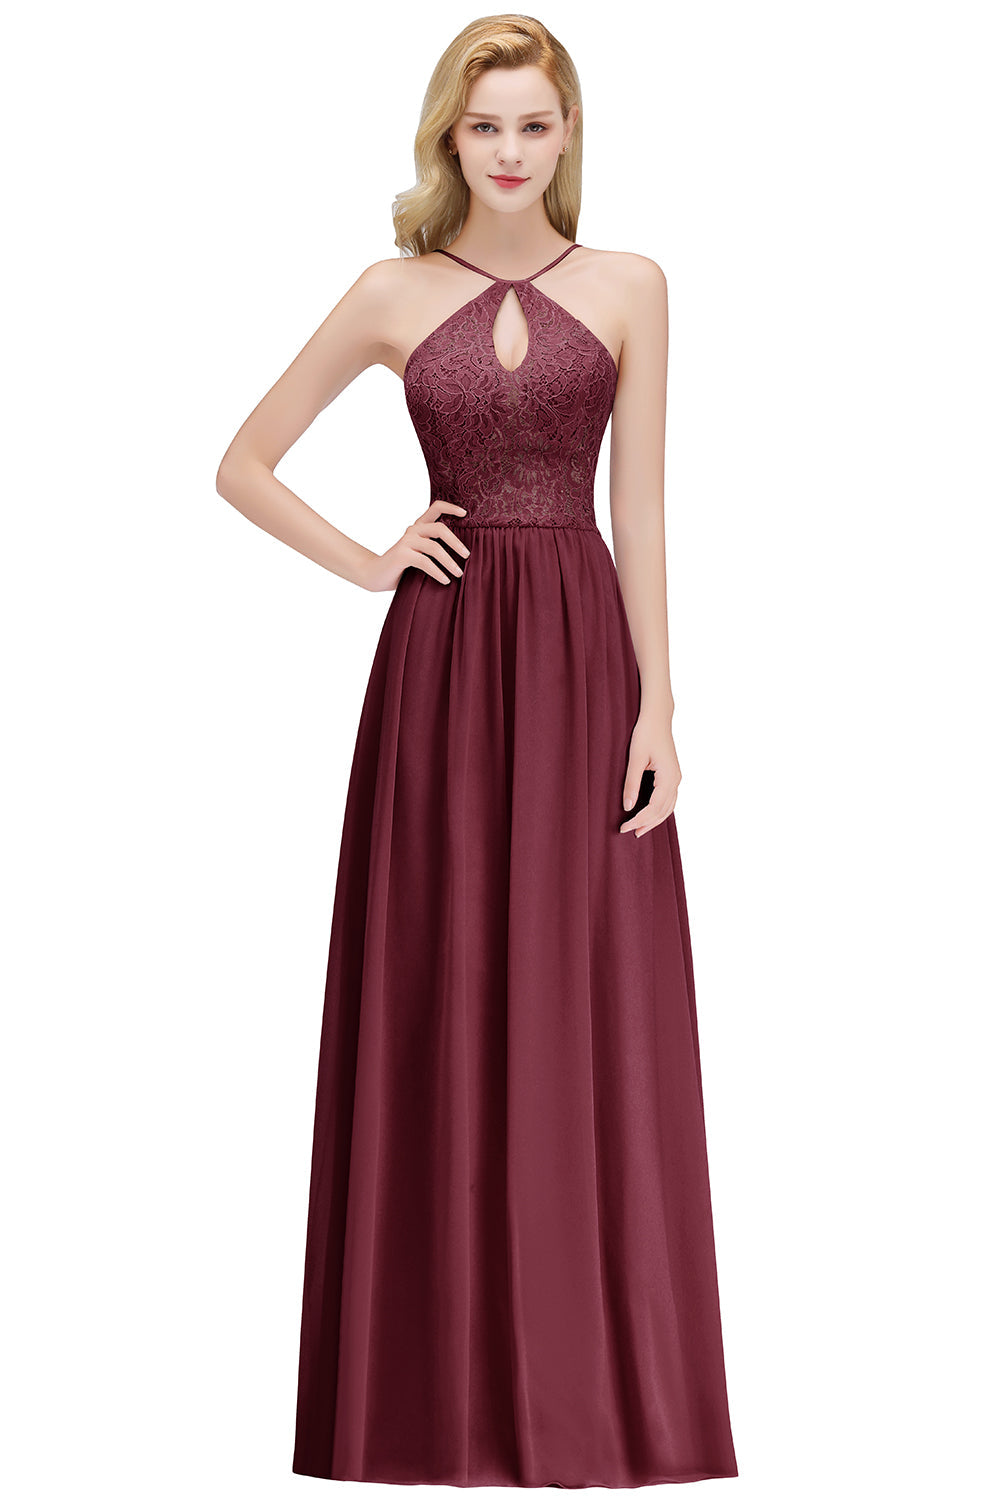 Long Lace Halter Floor-Length Bridesmaid Dresses | Sexy Chiffon Open Back Bridesmaid Dress with Keyhole